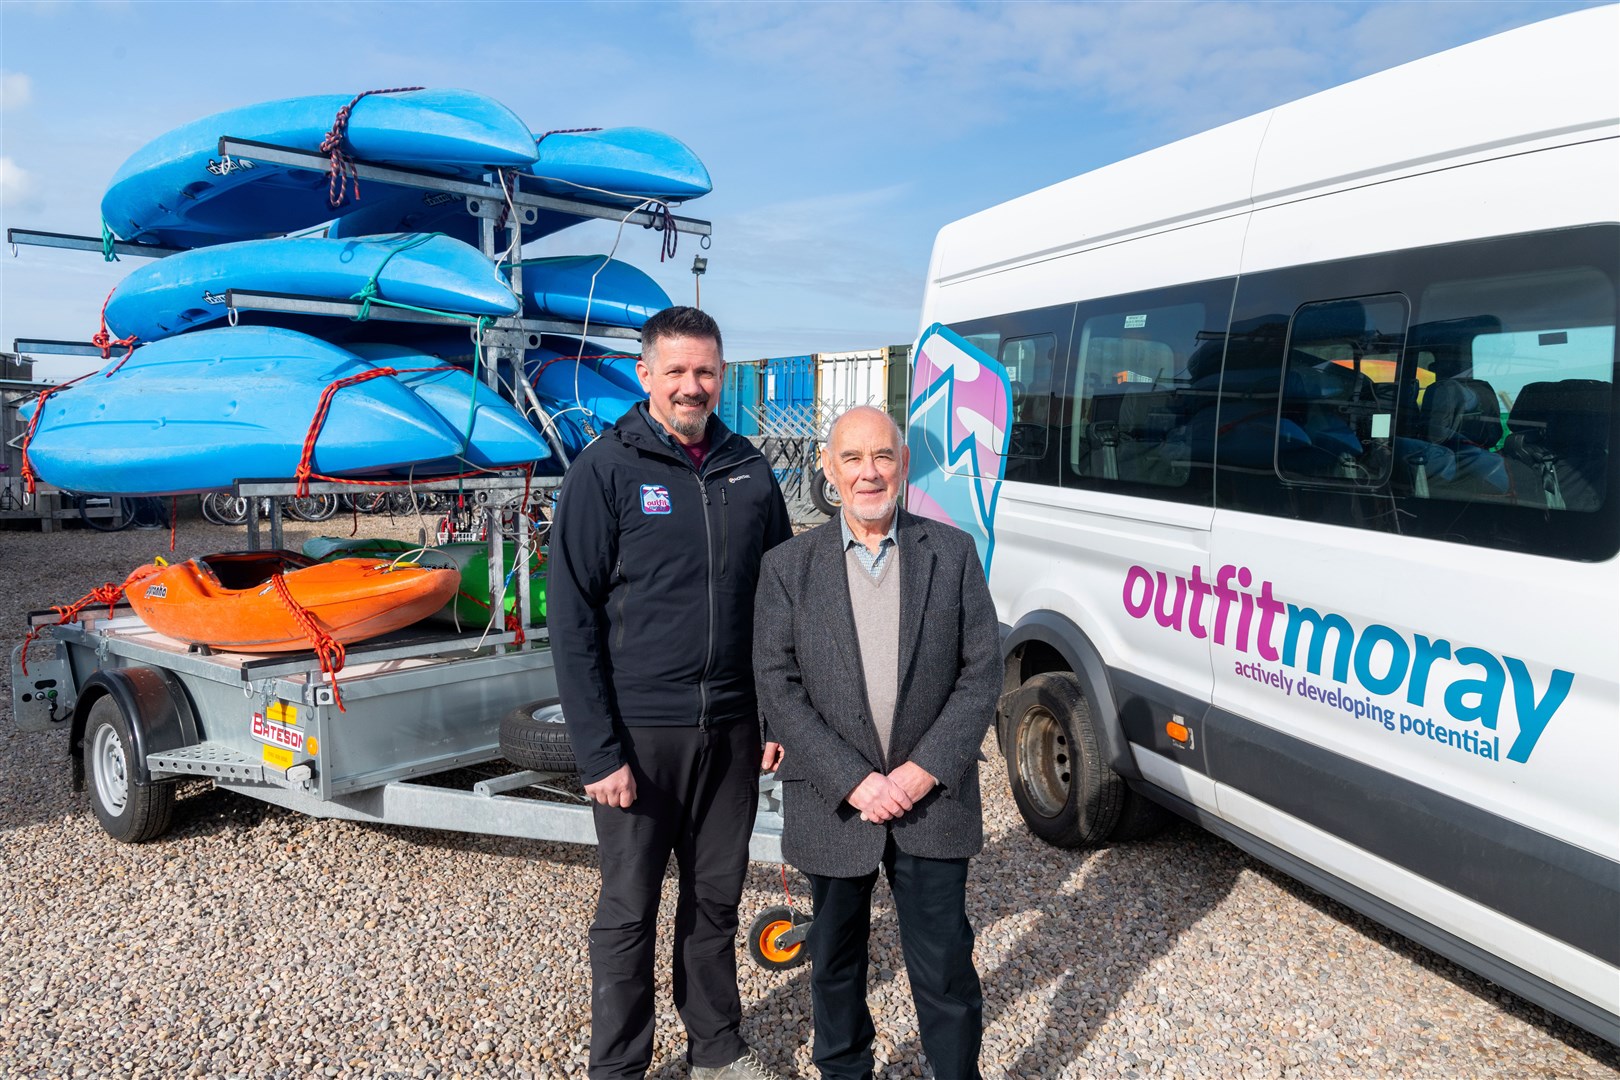 From left: Tony Brown (Chief Operating Officer at Outfit Moray) with George McIntrye (Chairman of The Gordon and Ena Baxter Foundation). Picture: Beth Taylor